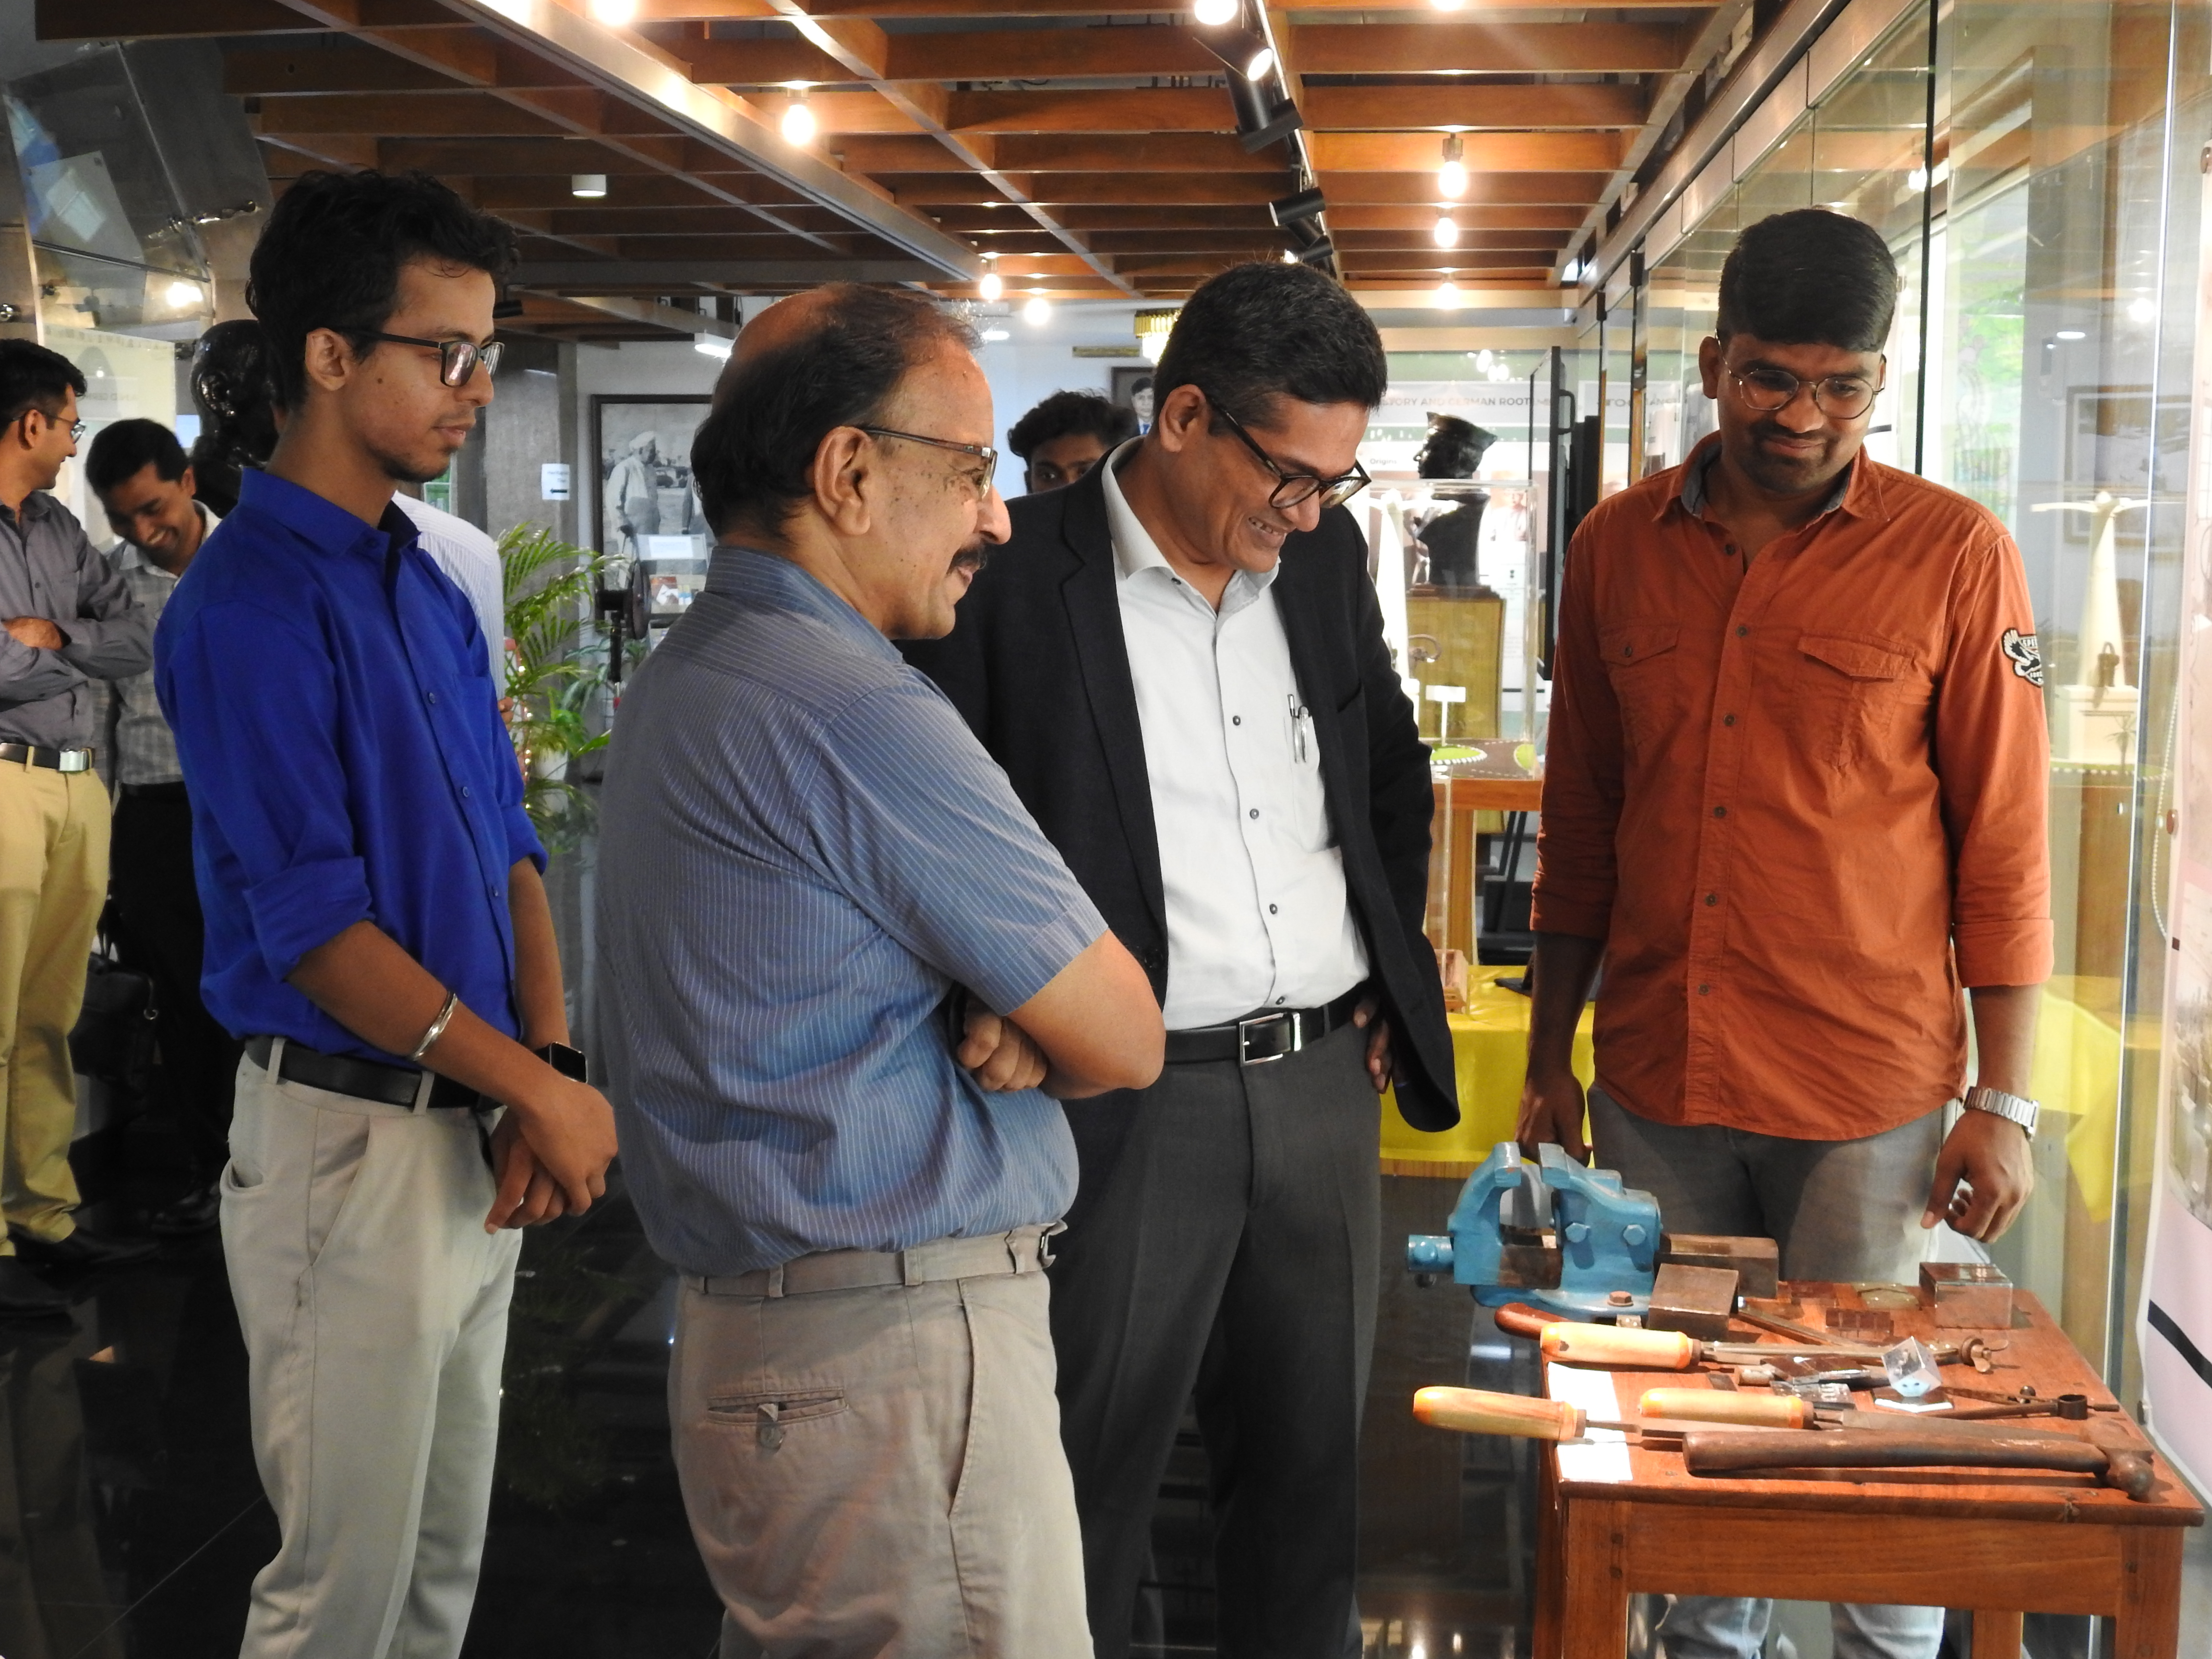 Mr. Krishnakumar Ramanathan observes the workshop bench located at the Heritage Centre